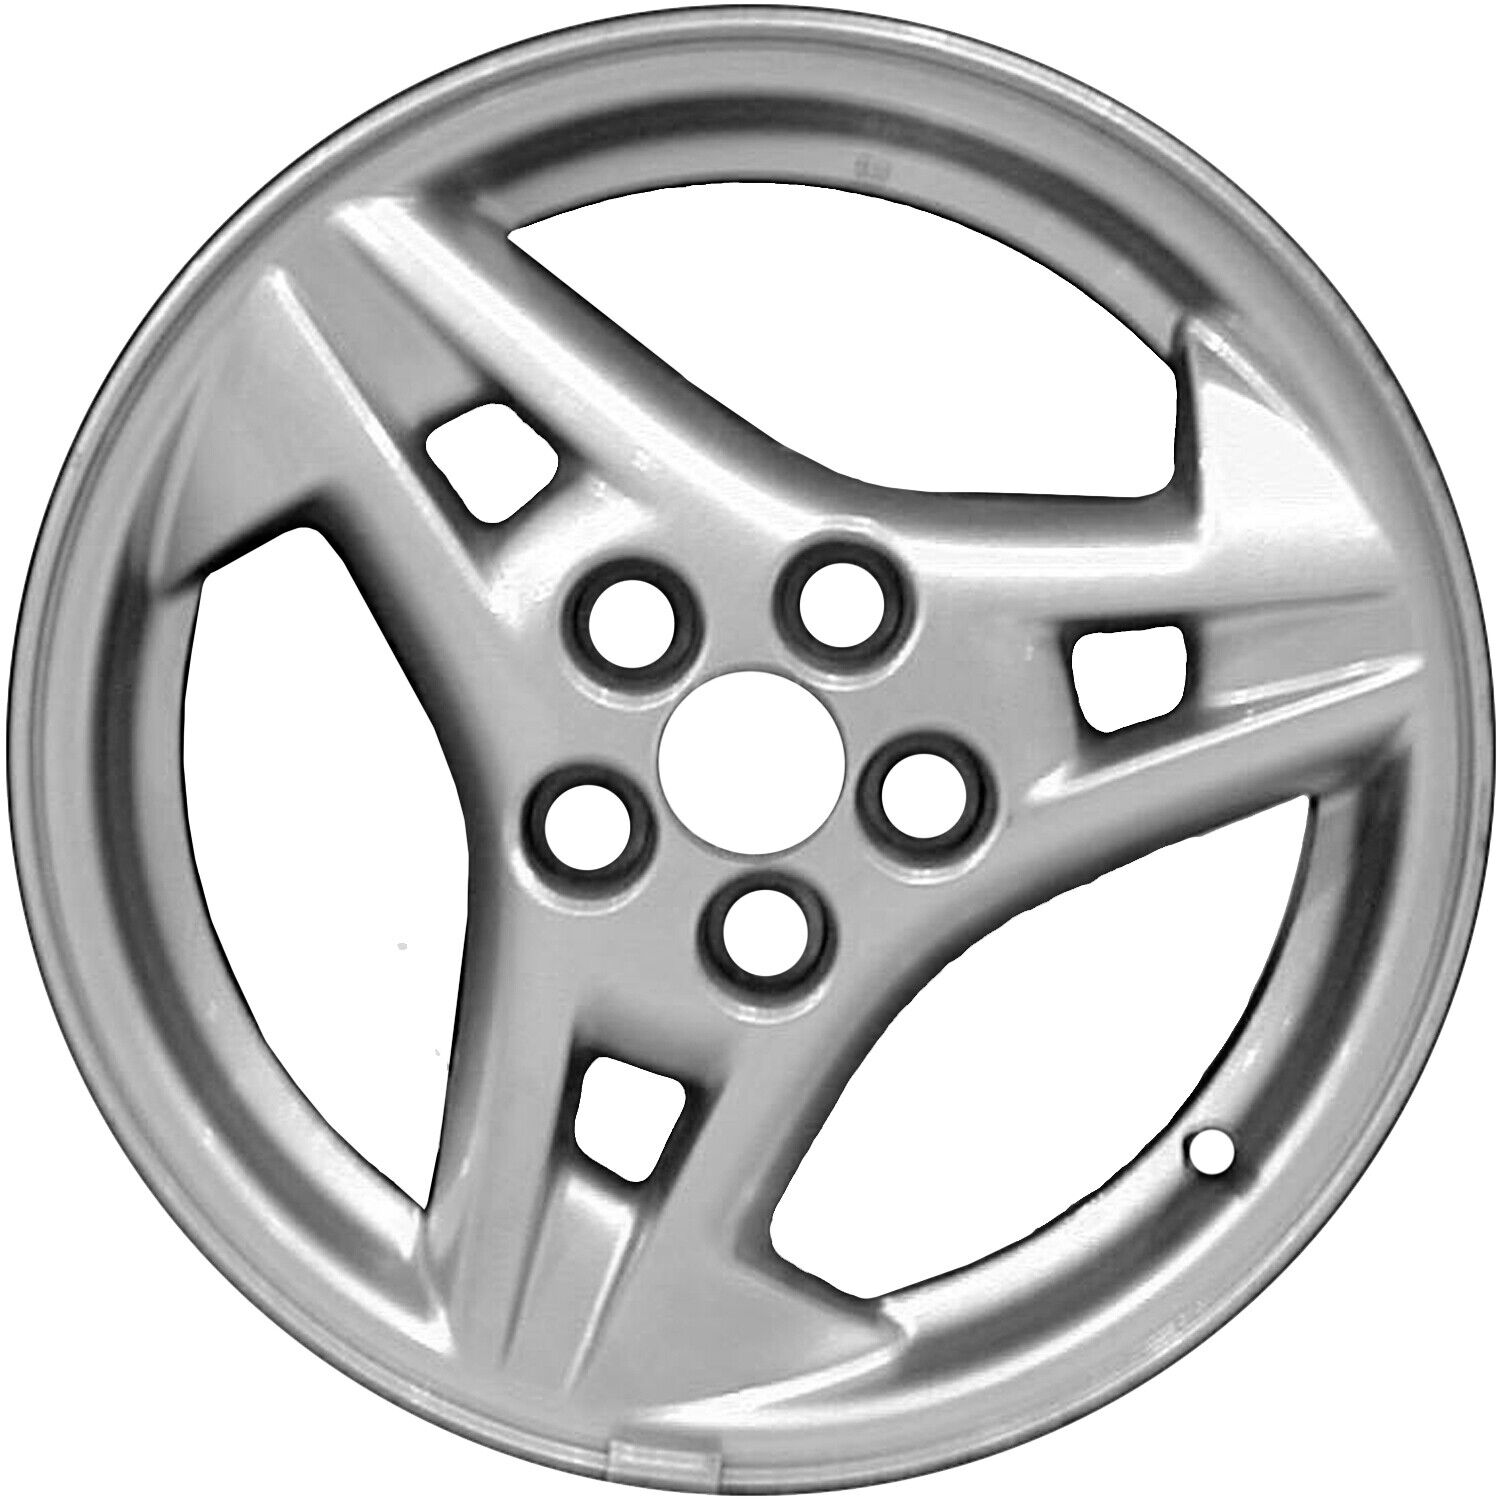 Reconditioned 15x6 Painted Silver Wheel fits 560-06560